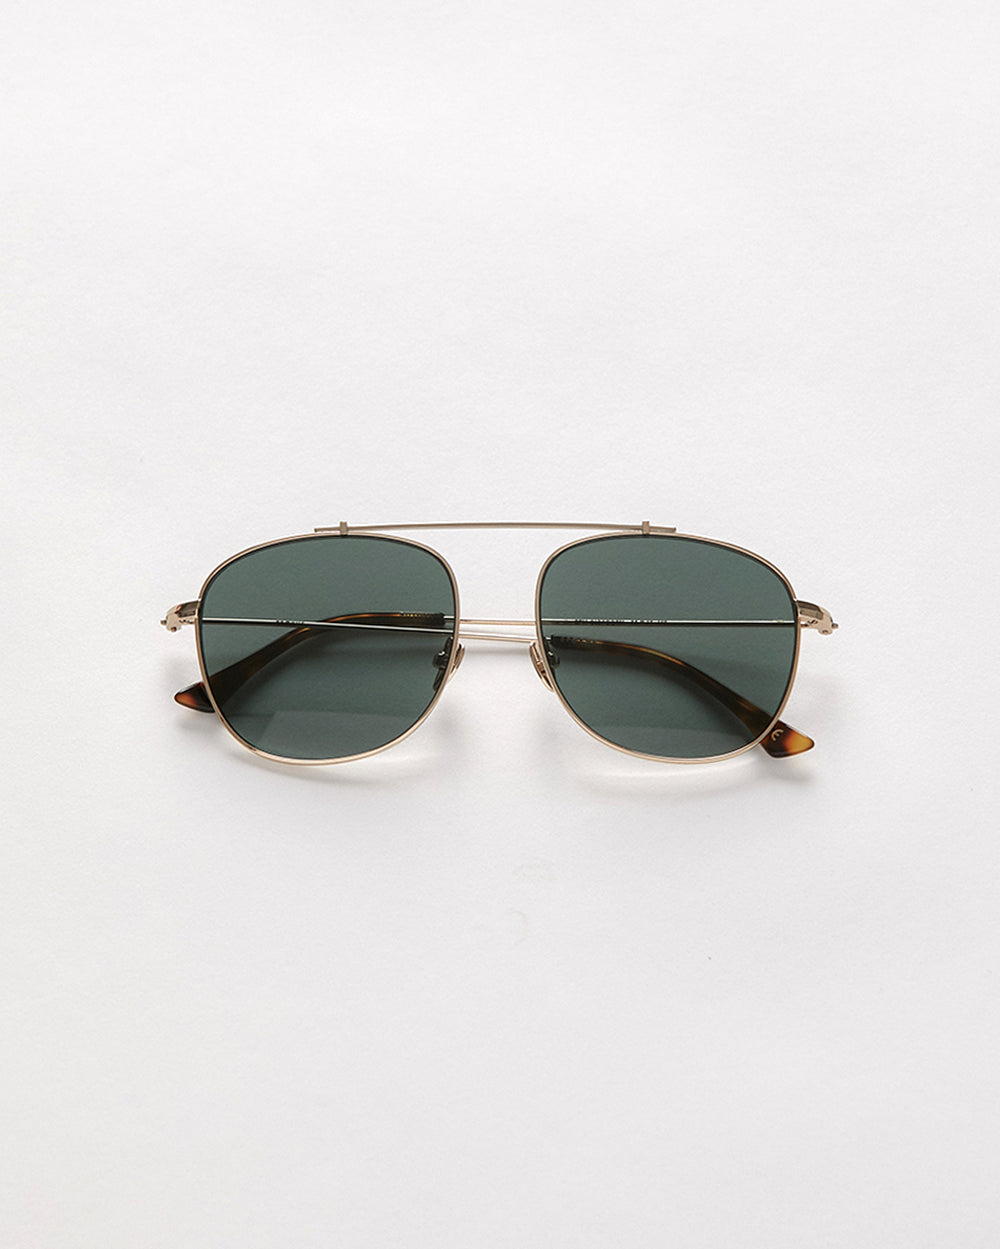 Notomy - Gold Polished / Green